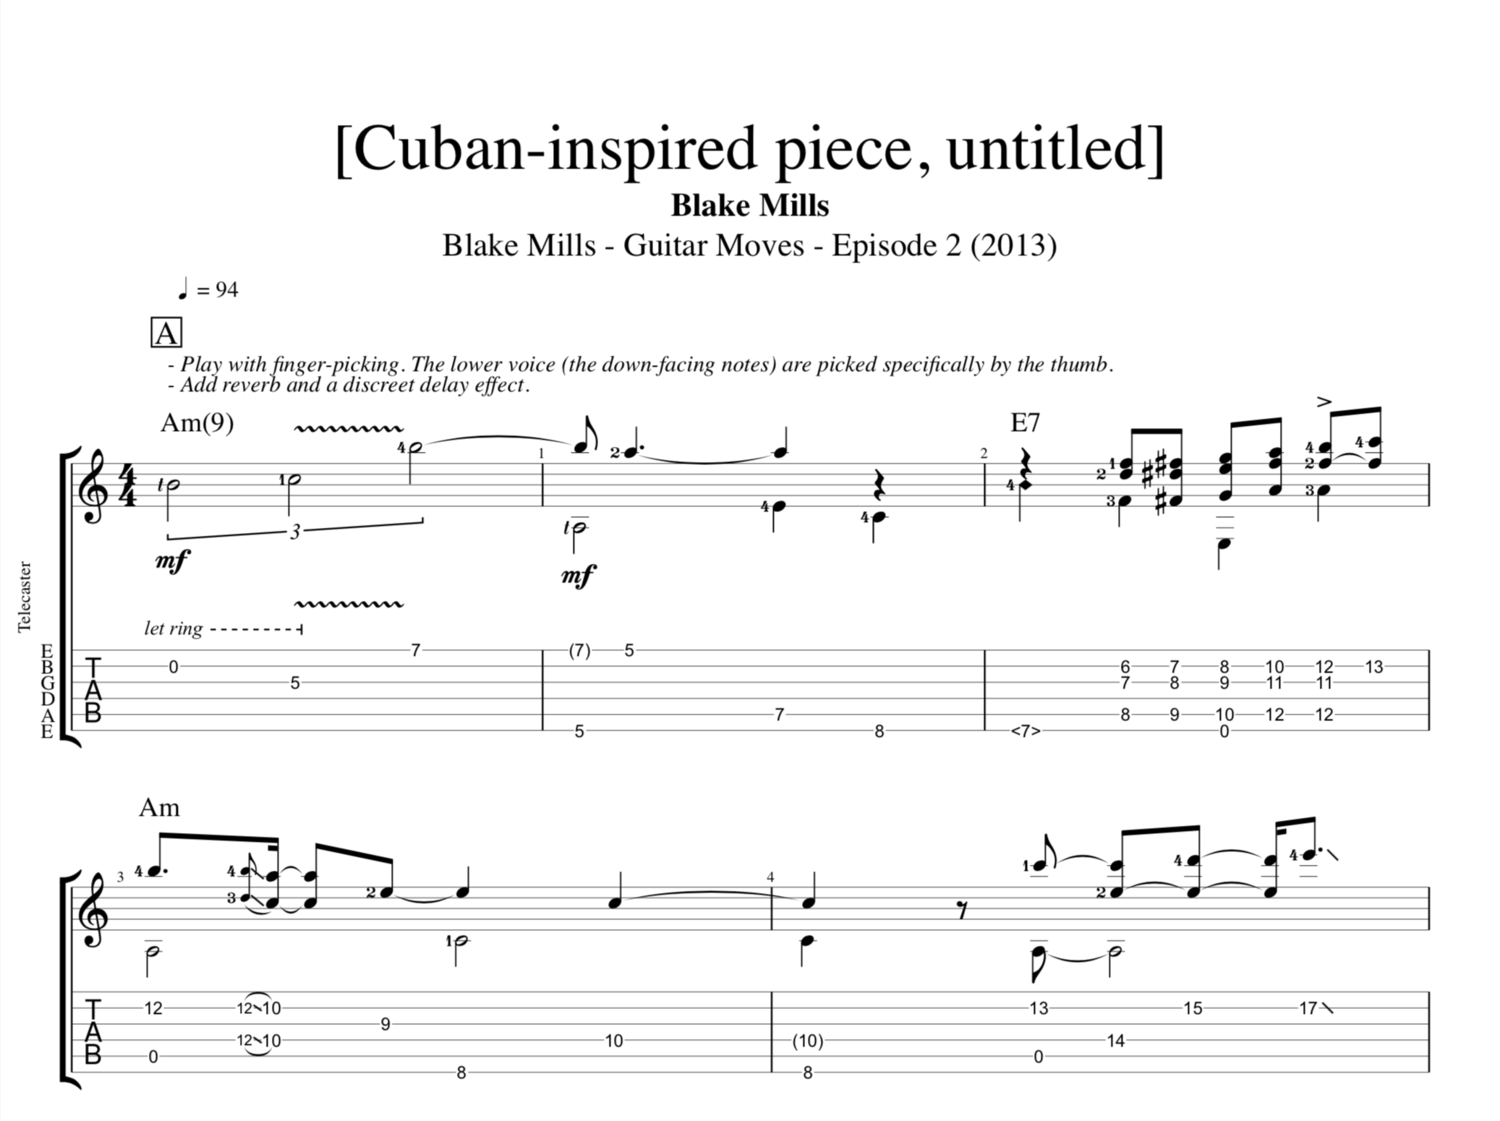 [Cuban-inspired piece, untitled] @ Guitar Moves, ep. 3, Blake Mills